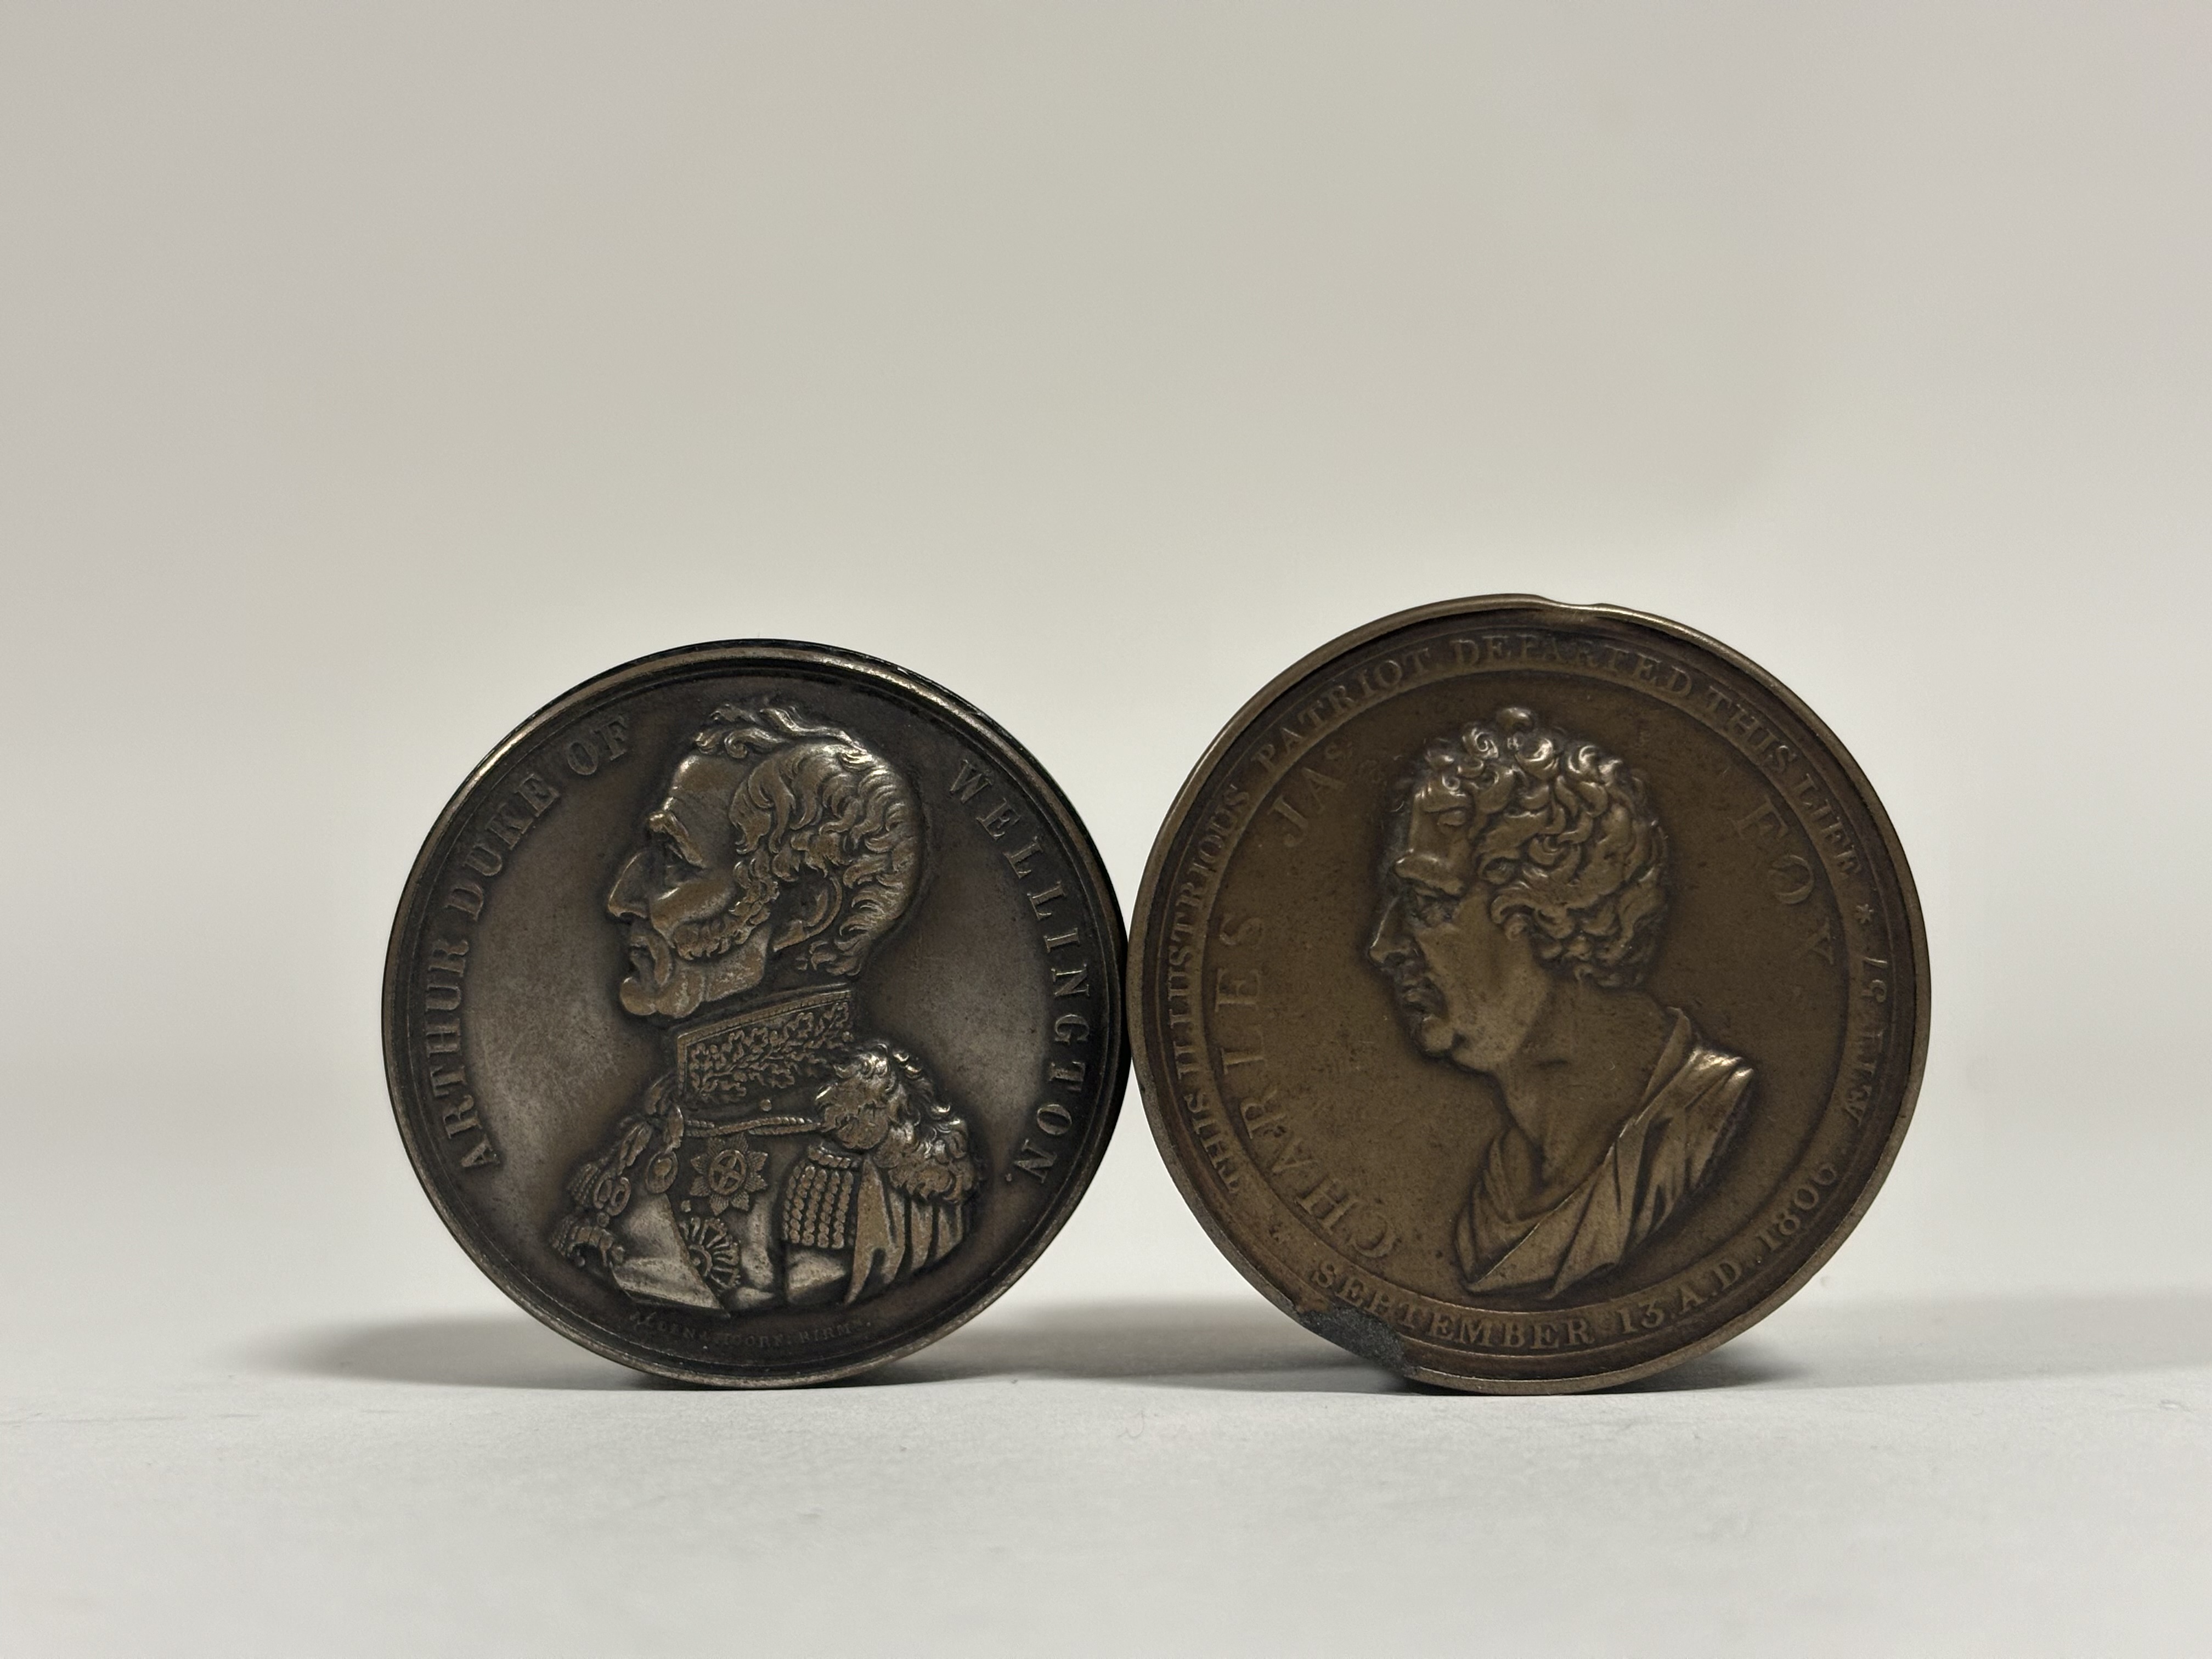 Two 19th century commemorative snuff boxes: a bronzed spelter circular example based on the design